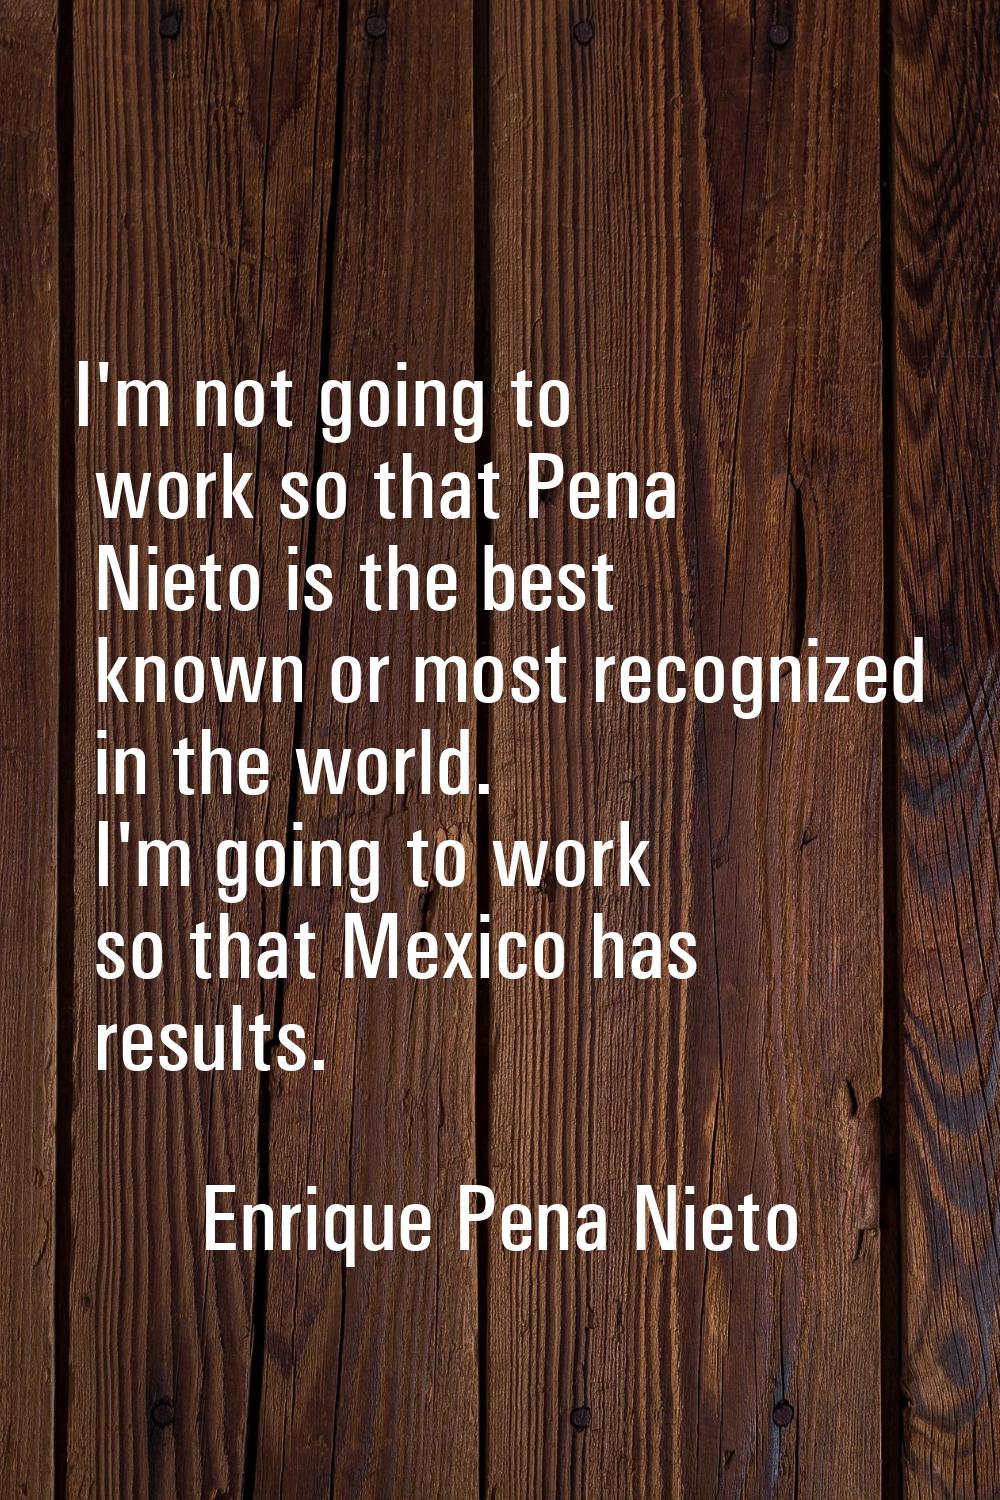 I'm not going to work so that Pena Nieto is the best known or most recognized in the world. I'm goi